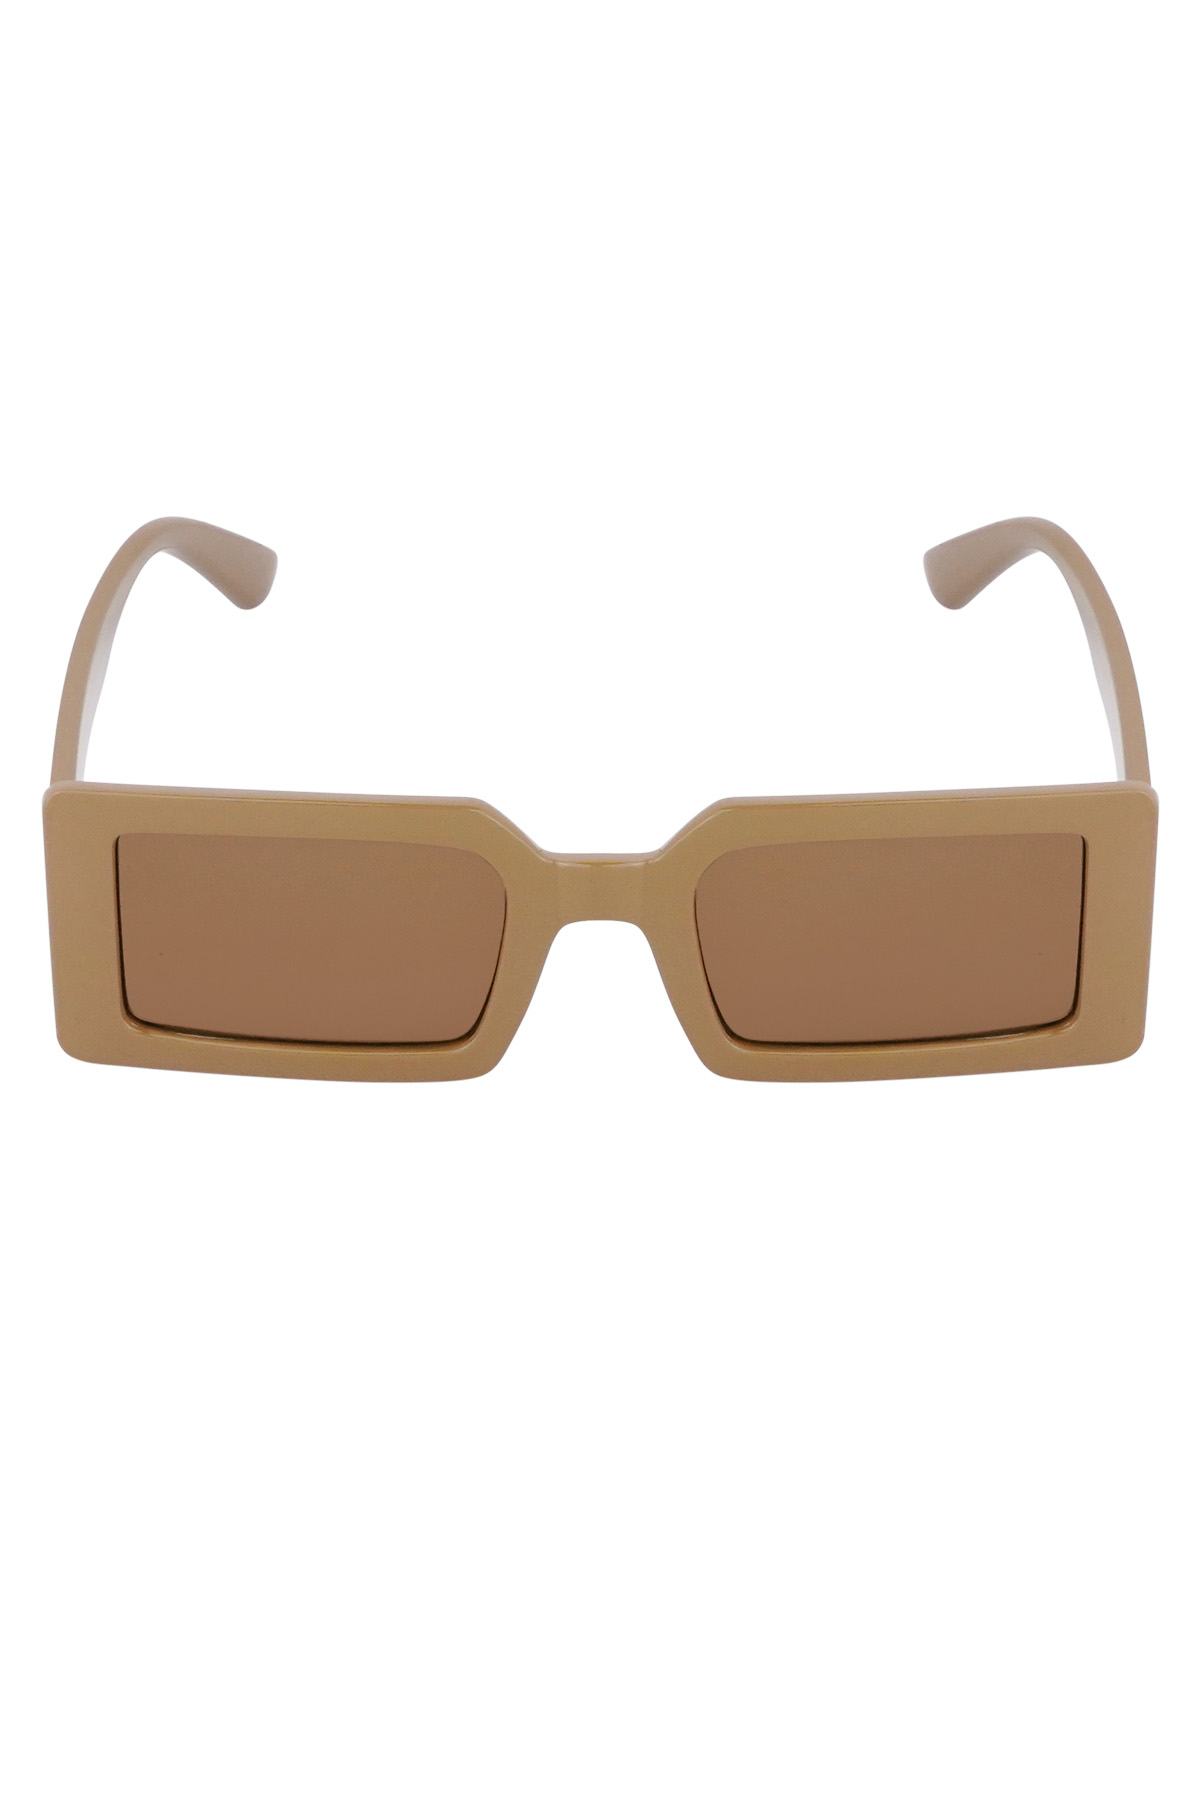 Shimmerglow sunglasses - beige h5 Picture4